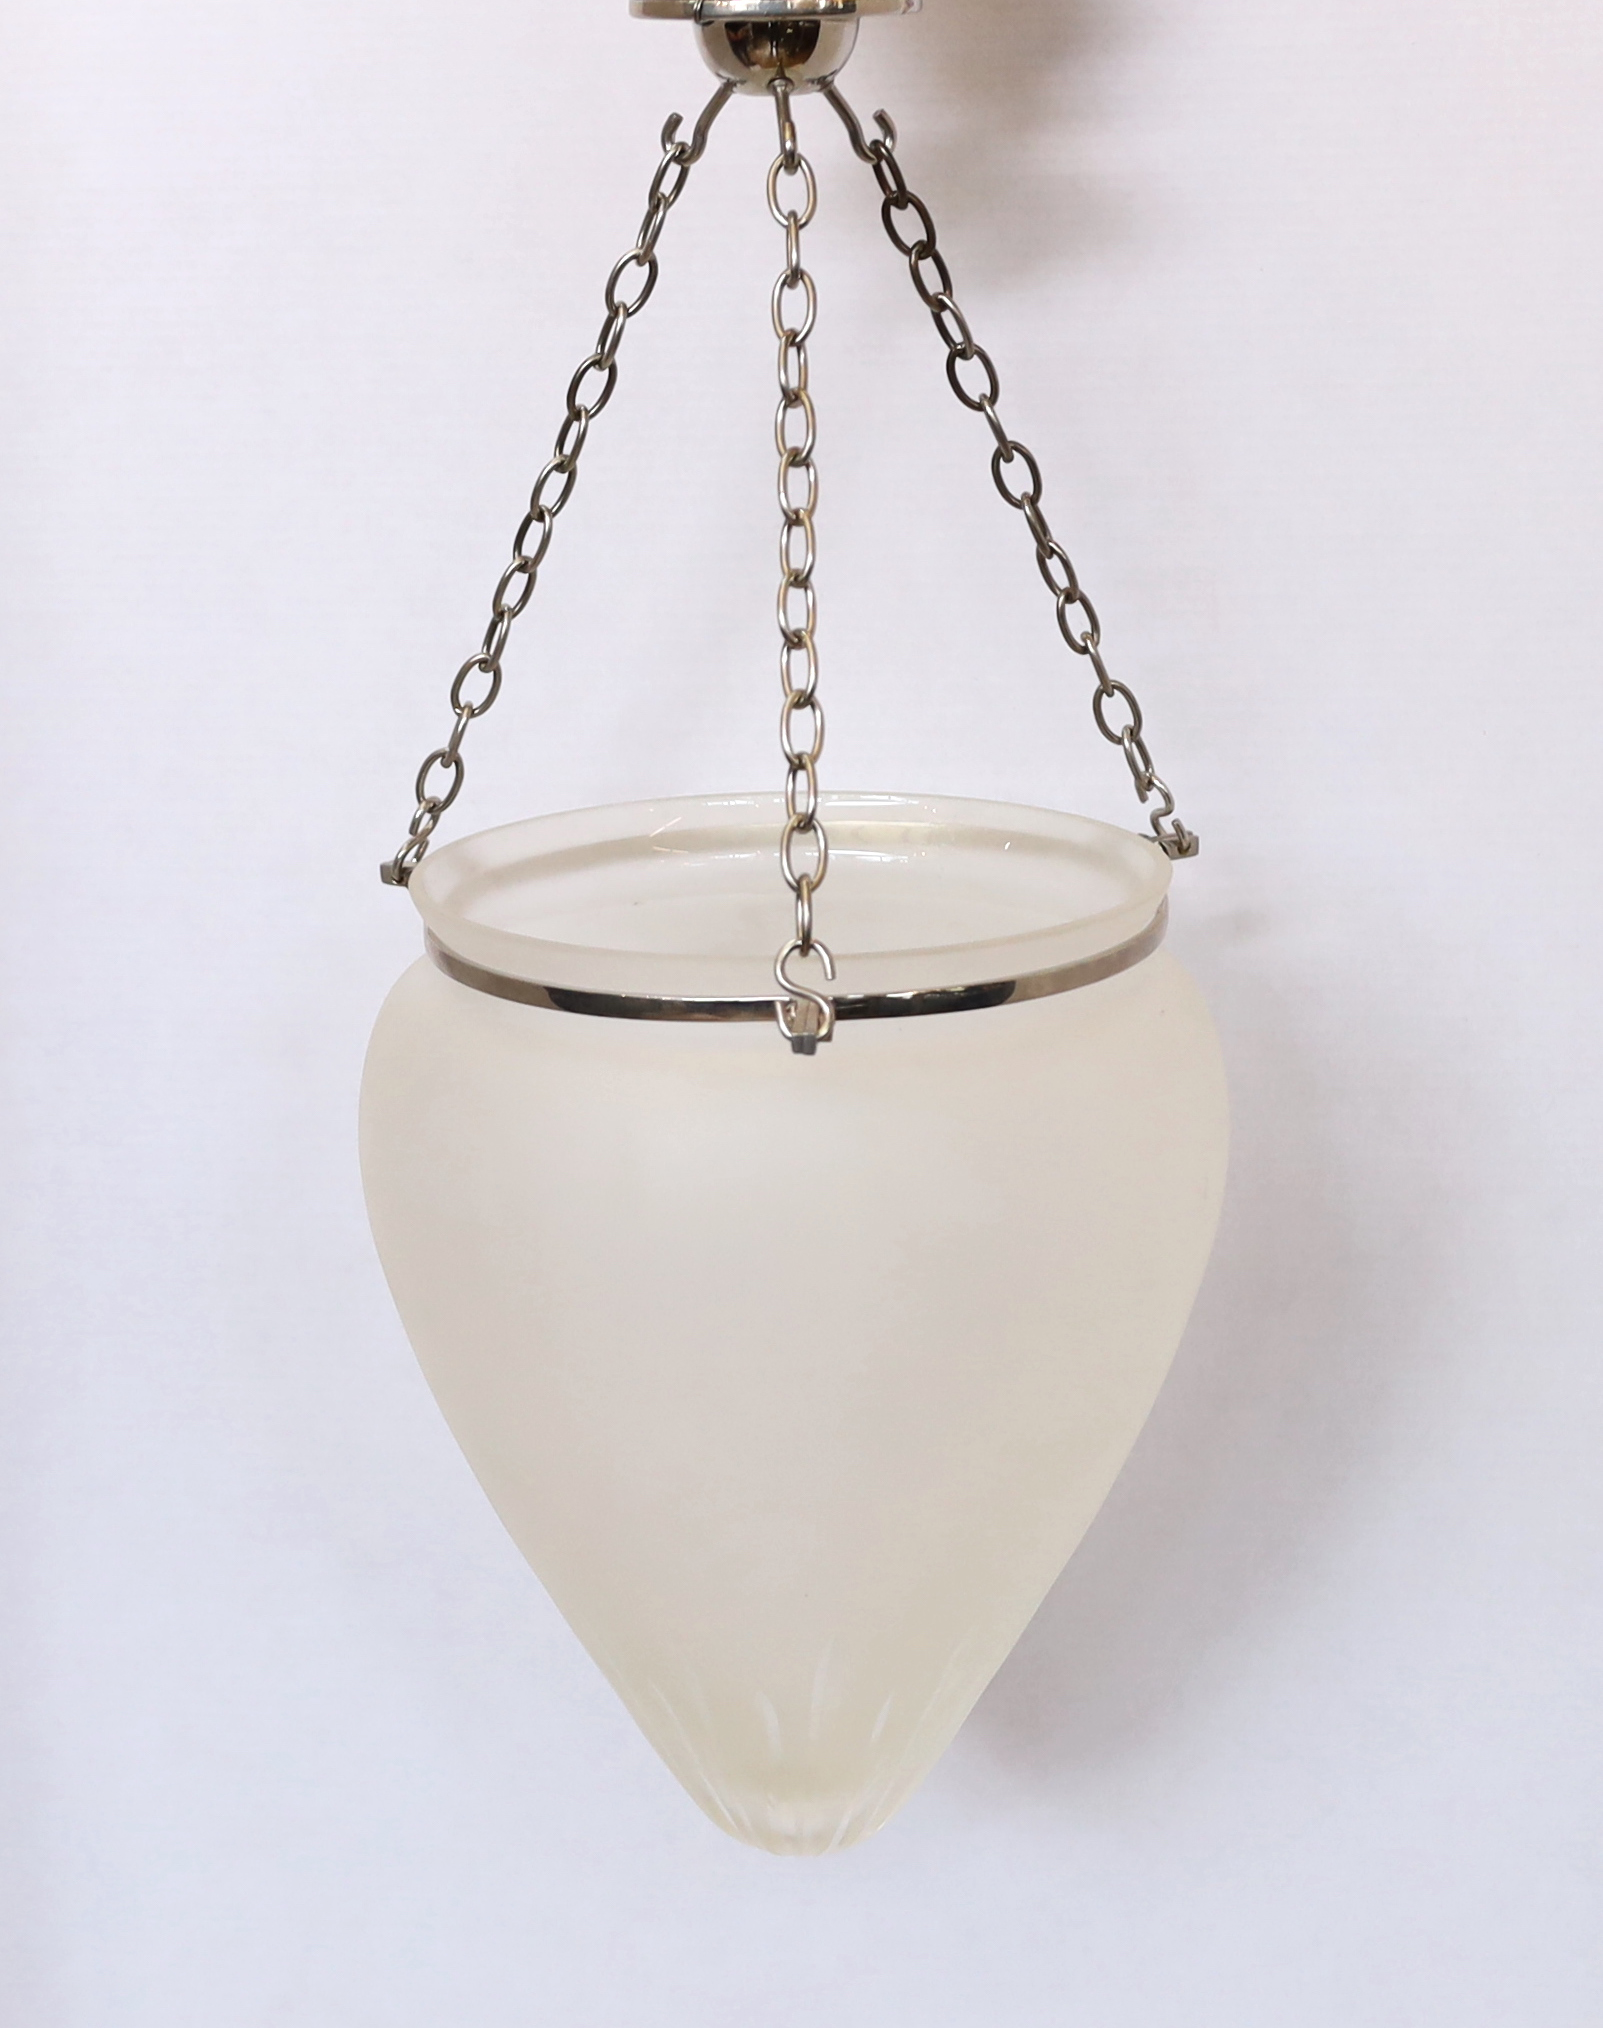 An Edwardian style frosted and cut glass hall lantern with chromed metal fittings, height 48cm - Image 2 of 3